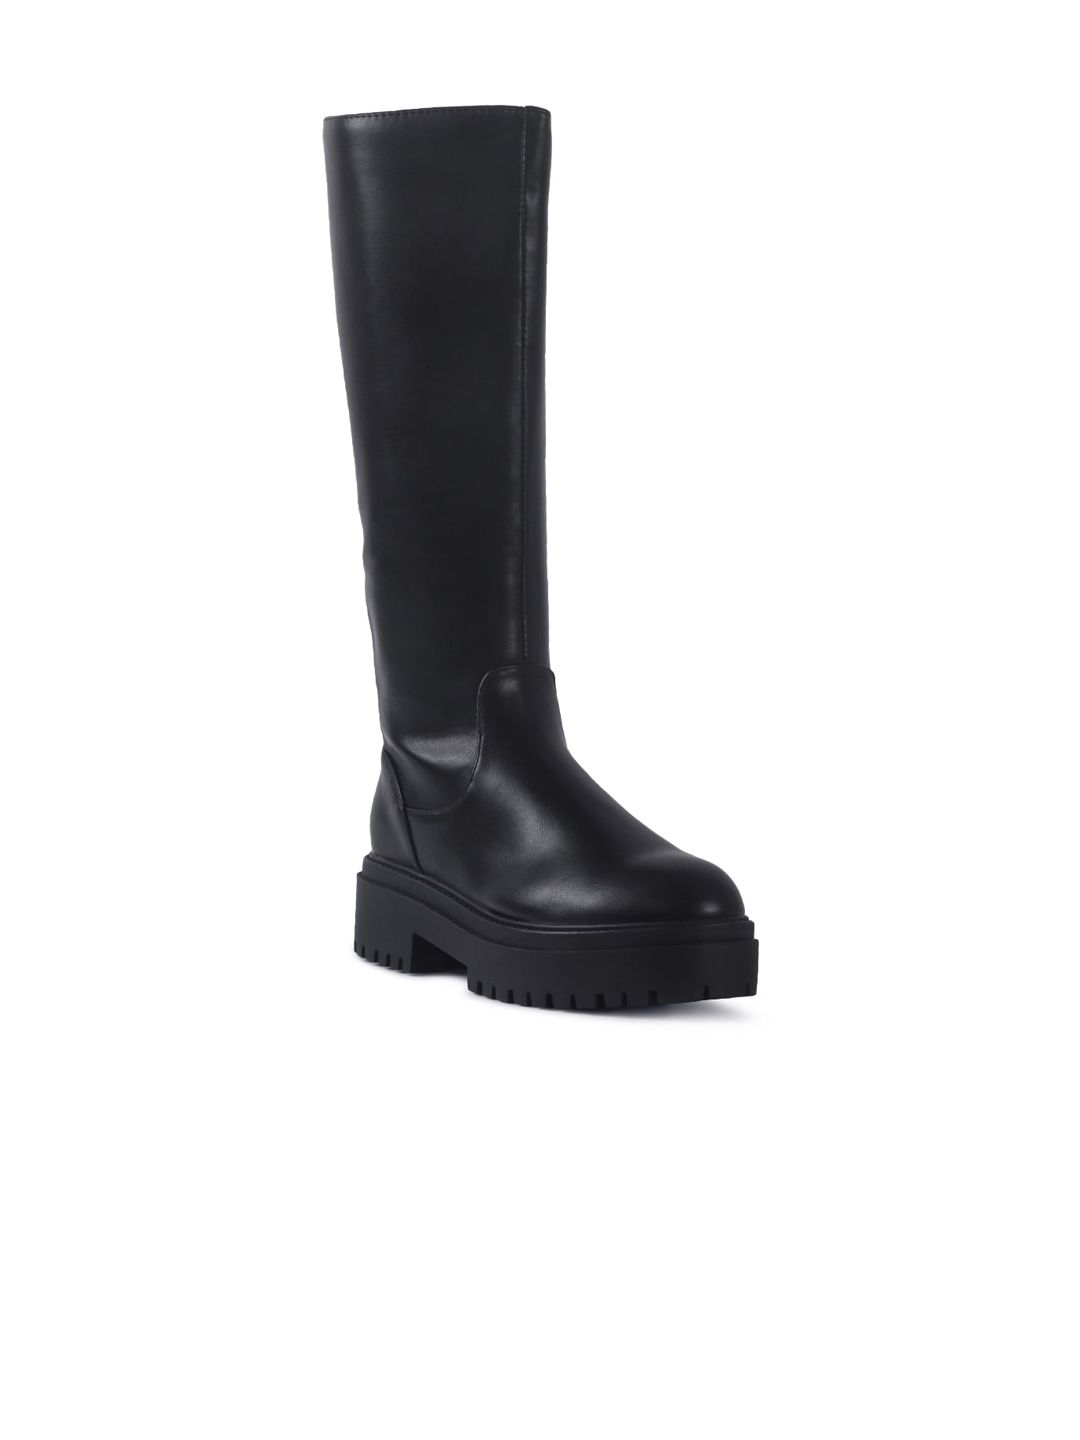 London Rag Black High-Top Block Heeled Boots Price in India